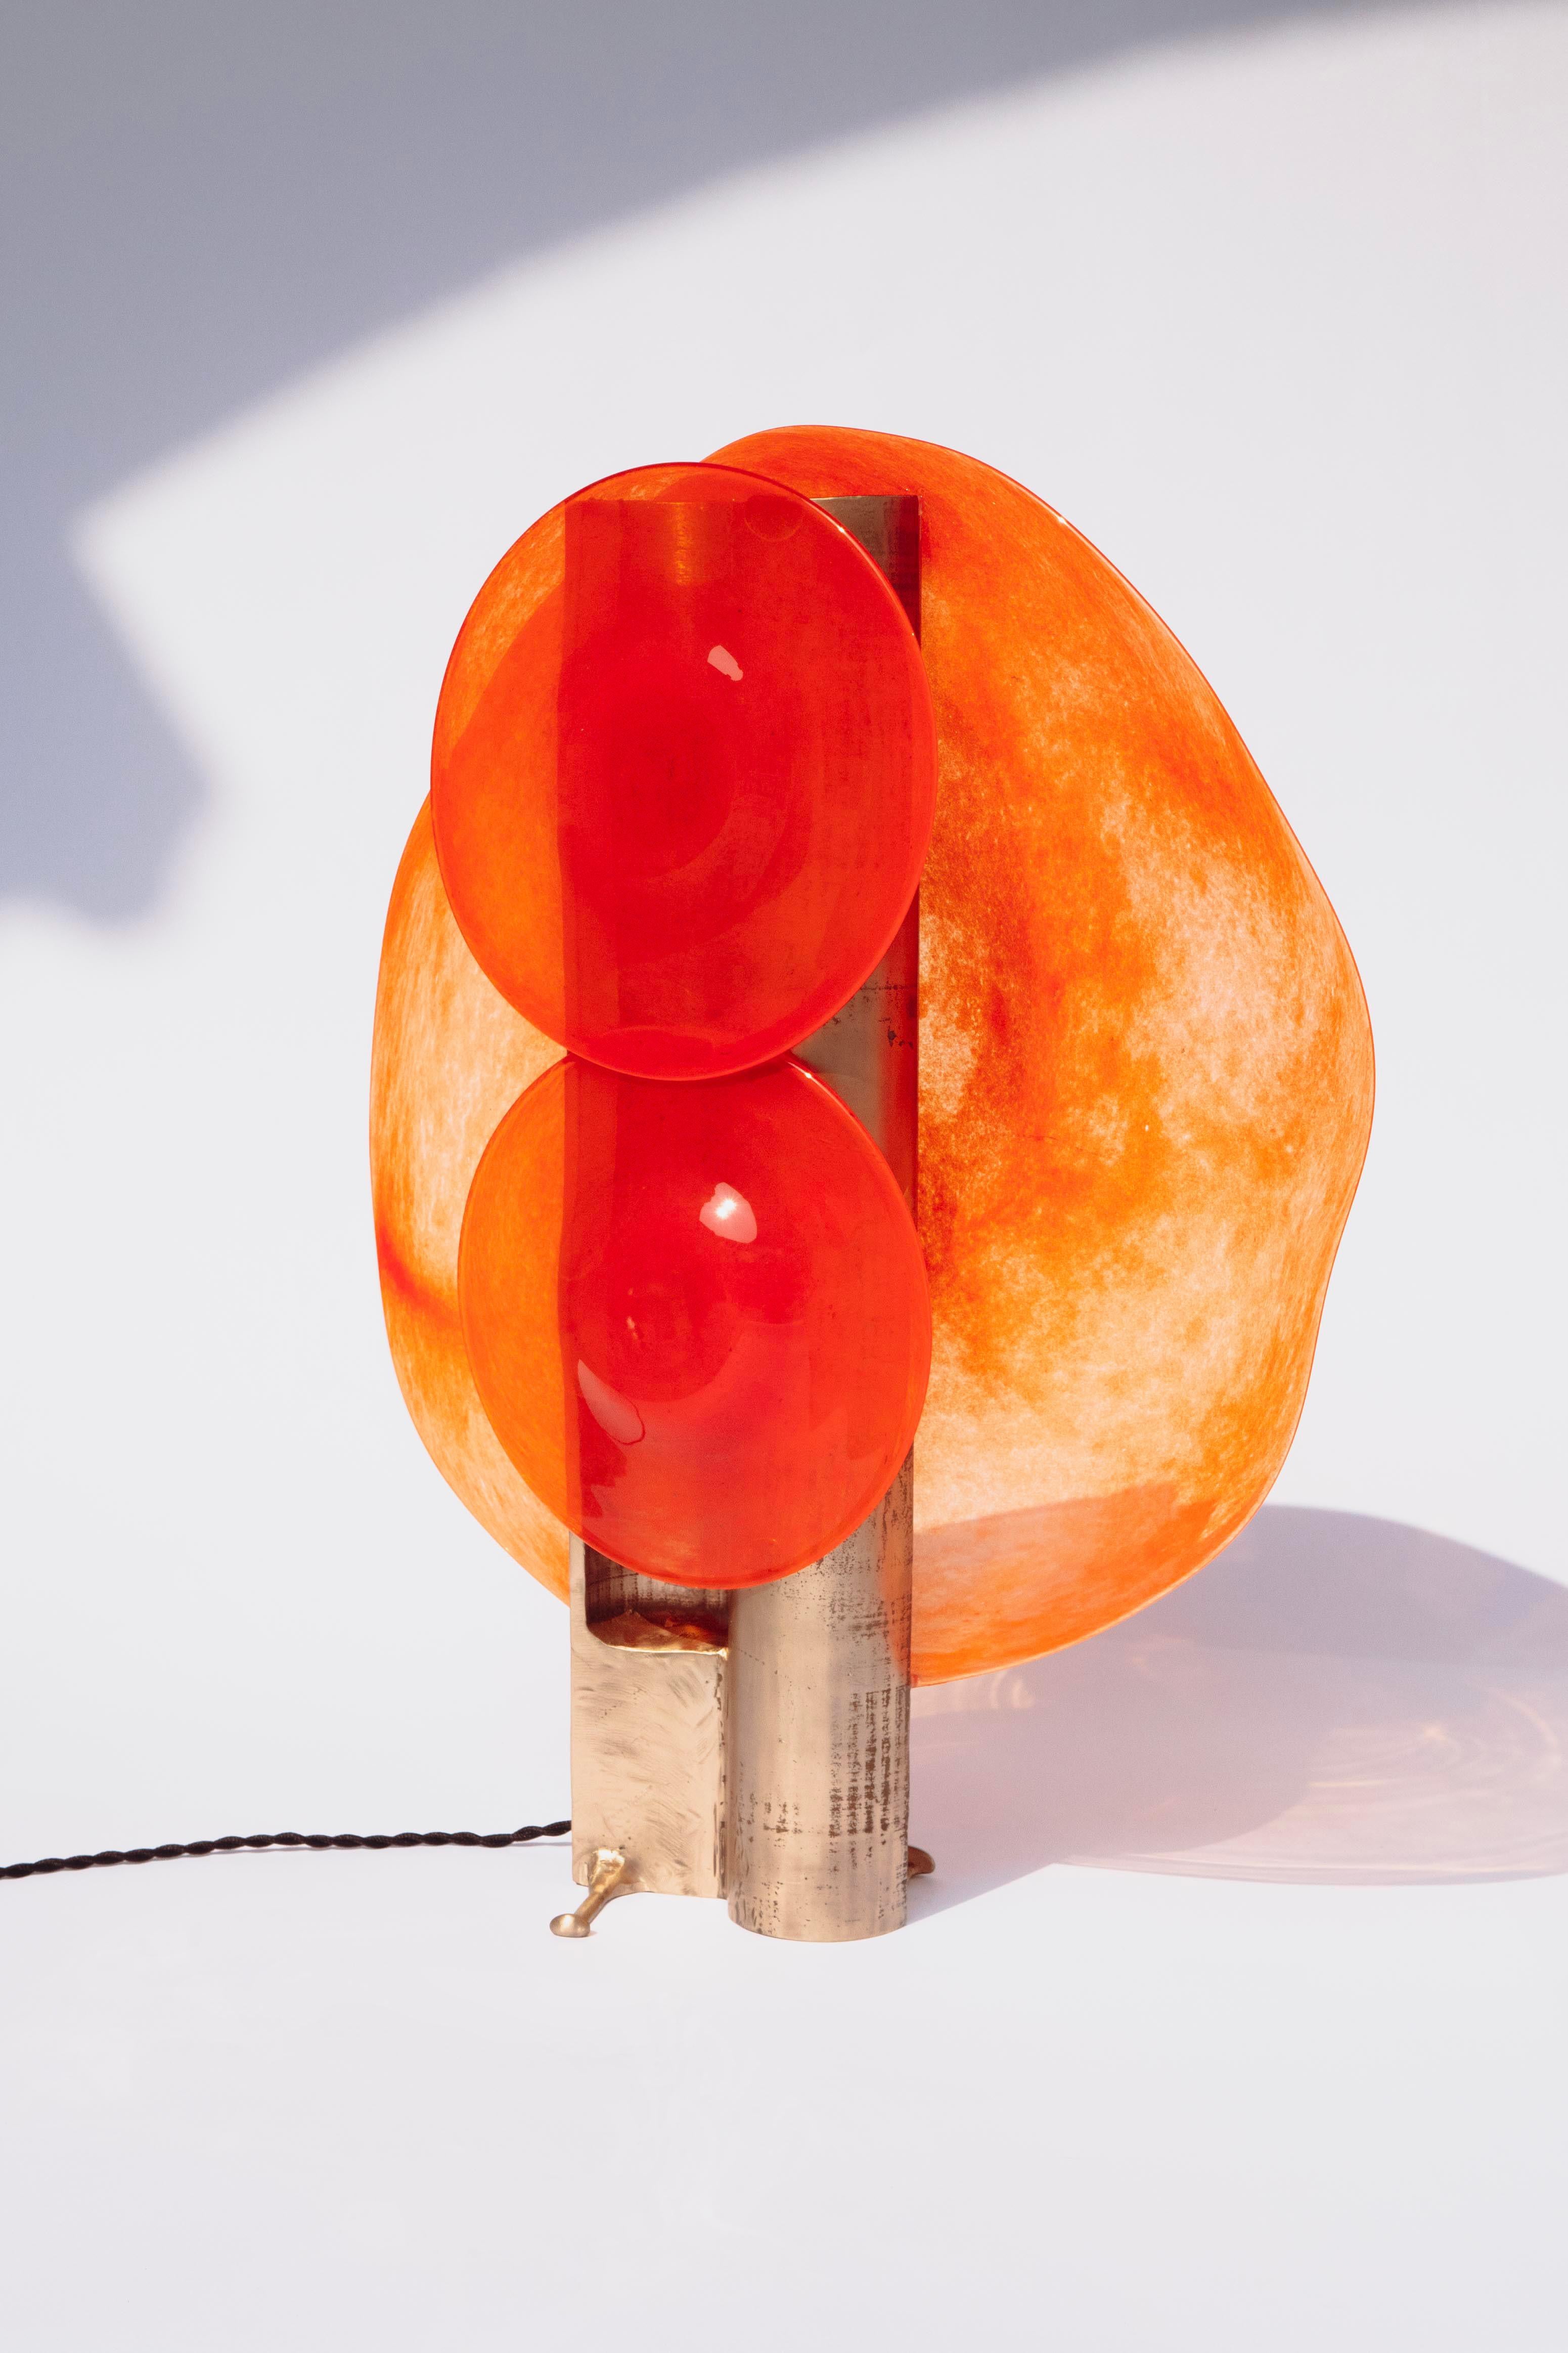 Madrugada Table Lamp by Clément Thevenot
Exclusively Sold By Galerie Philia.
Limited Edition Of 12 Pieces.
Designed by Clément Thevenot and Joyce Broussillou.
Dimensions: D 44,5 x W 20 x H 67 cm.
Materials: Bronze, blown glass and 24v hardware